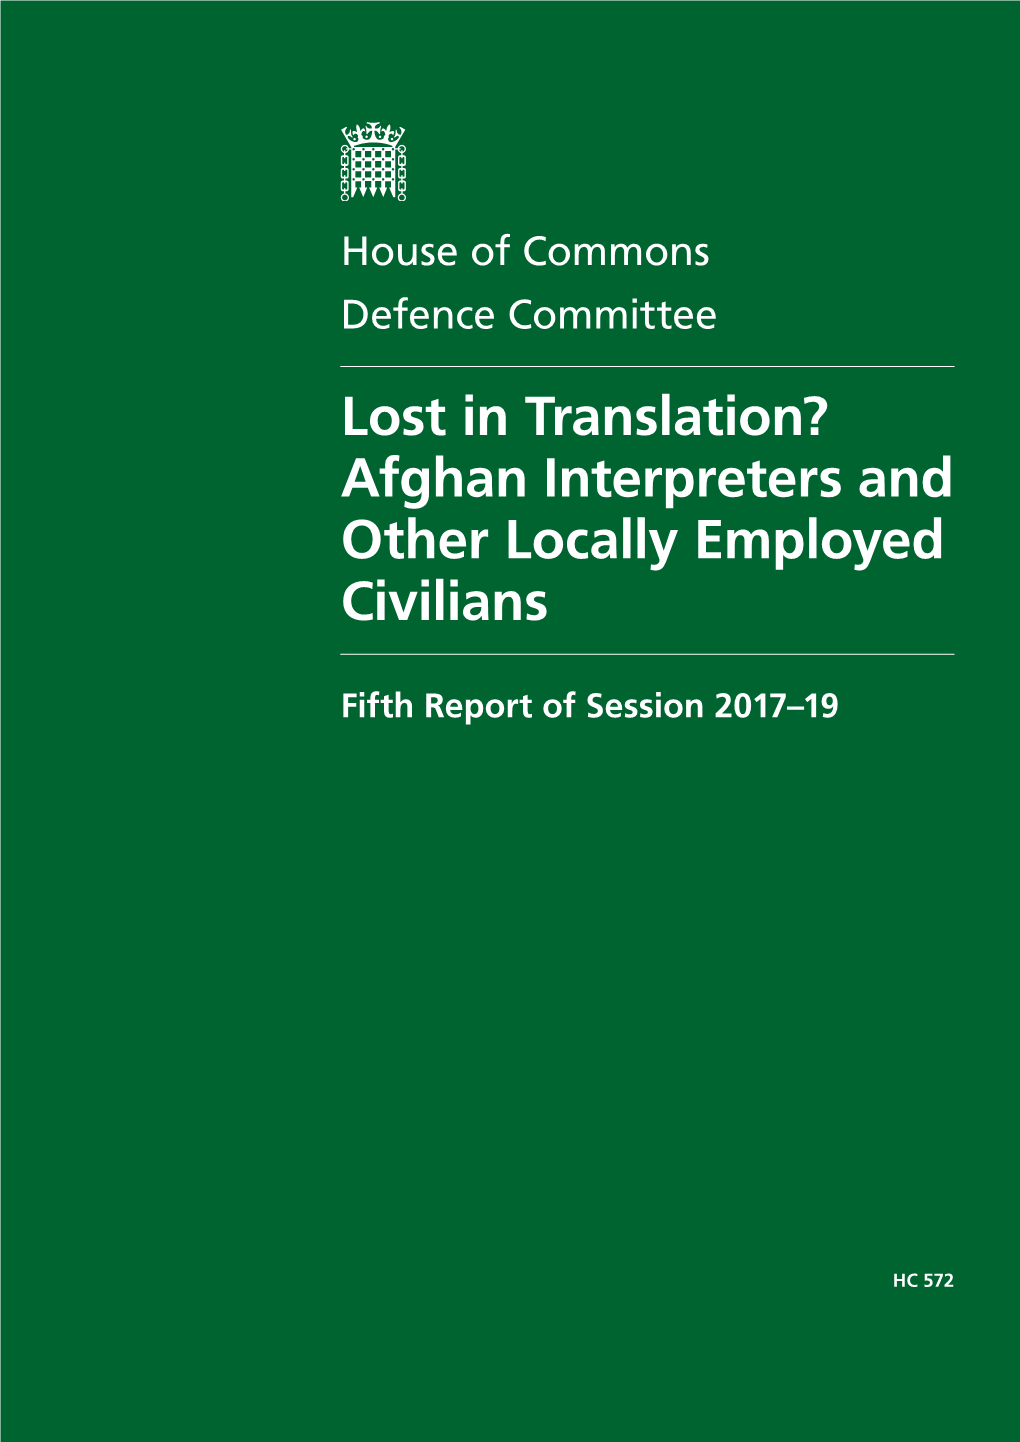 Lost in Translation? Afghan Interpreters and Other Locally Employed Civilians